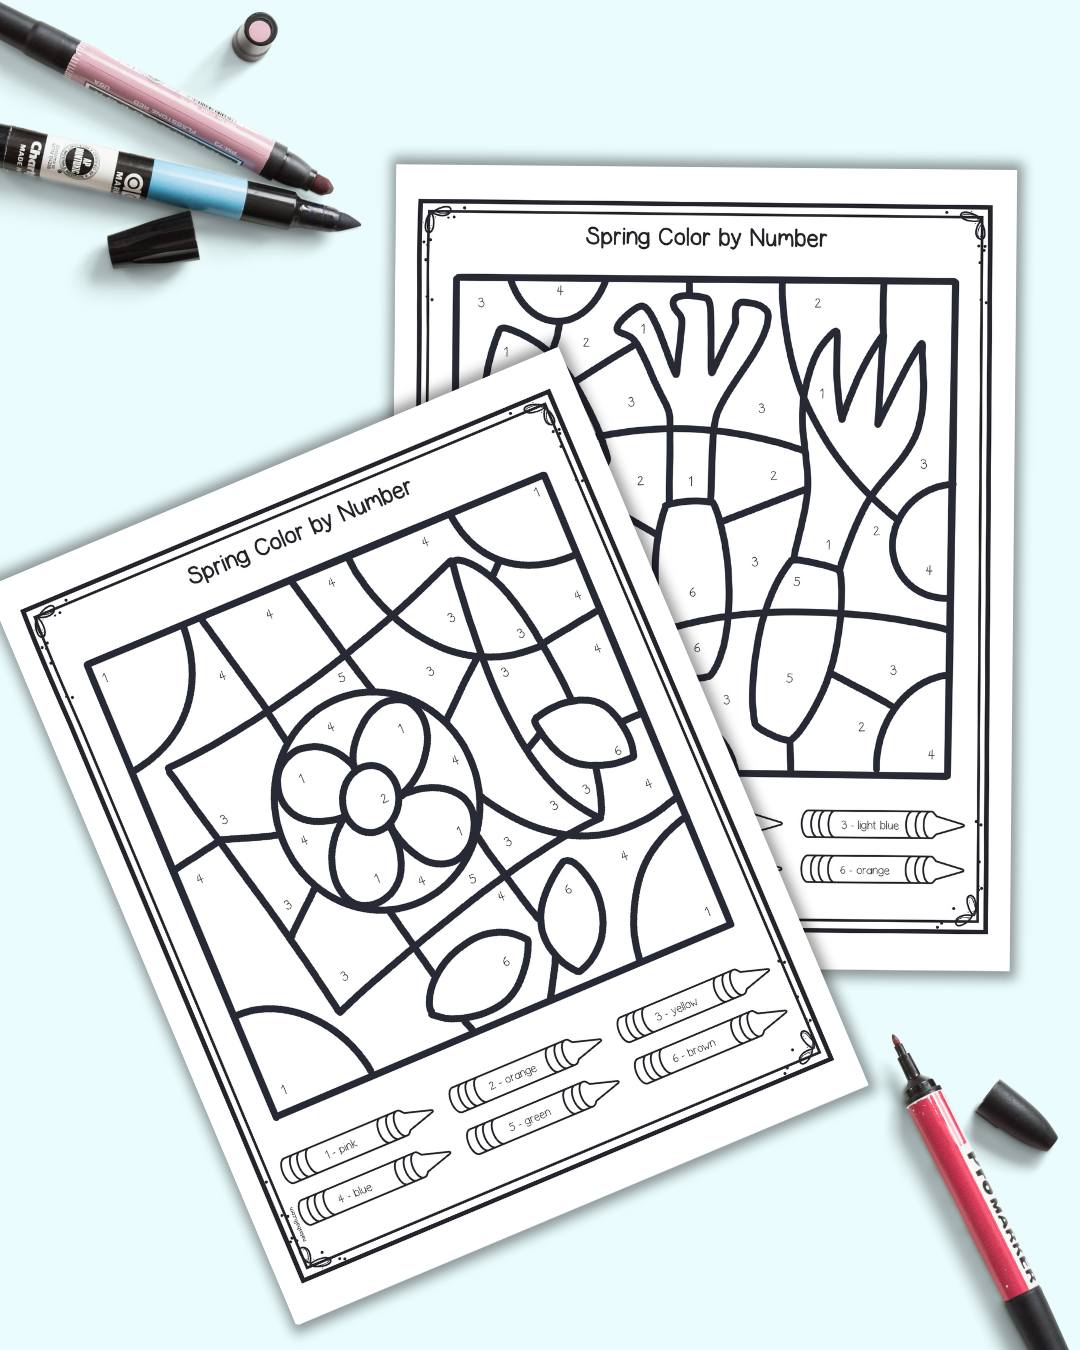 A preview of two pages of spring themed color by number worksheets. One has a seed packet and the other gardening tools